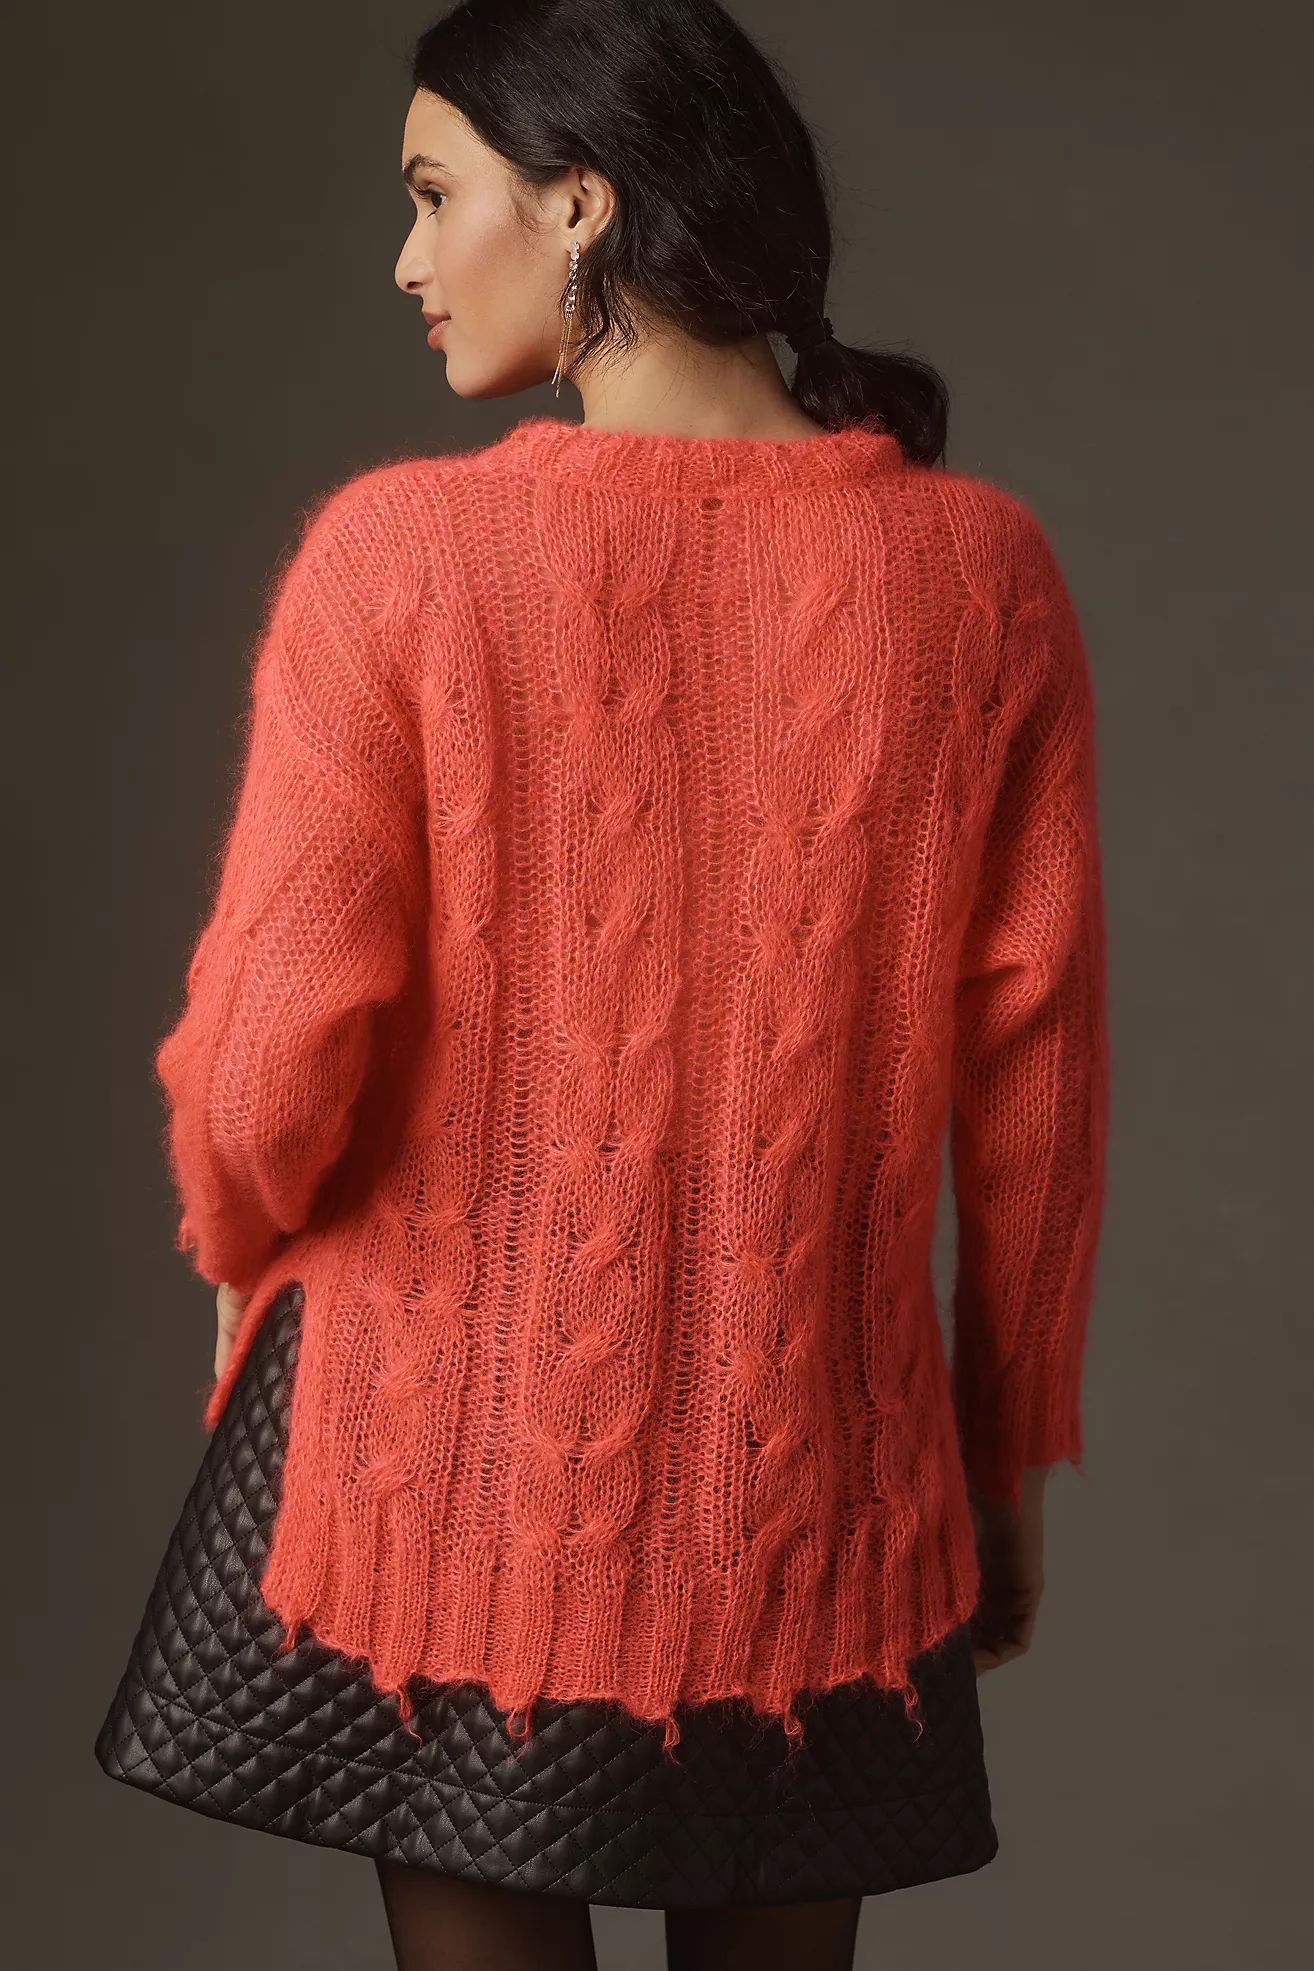 The Posey Stitchy Distressed Sweater | Anthropologie (US)